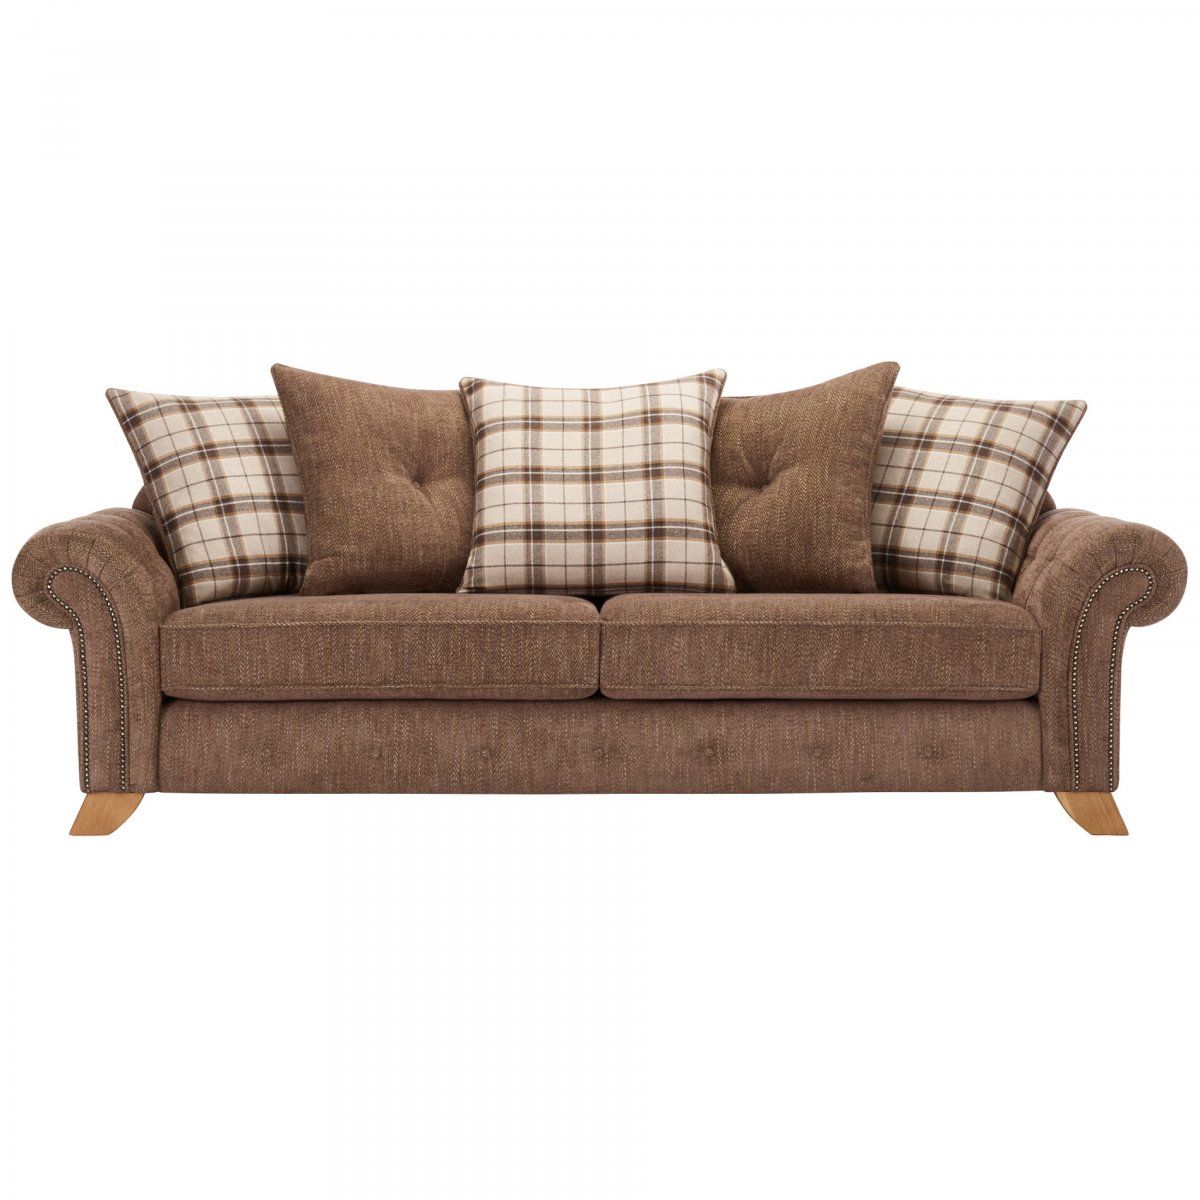 Montana 4 Seater Sofa With Pillow Back In Brown Fabric With Regard To Montana Sofas (View 8 of 15)